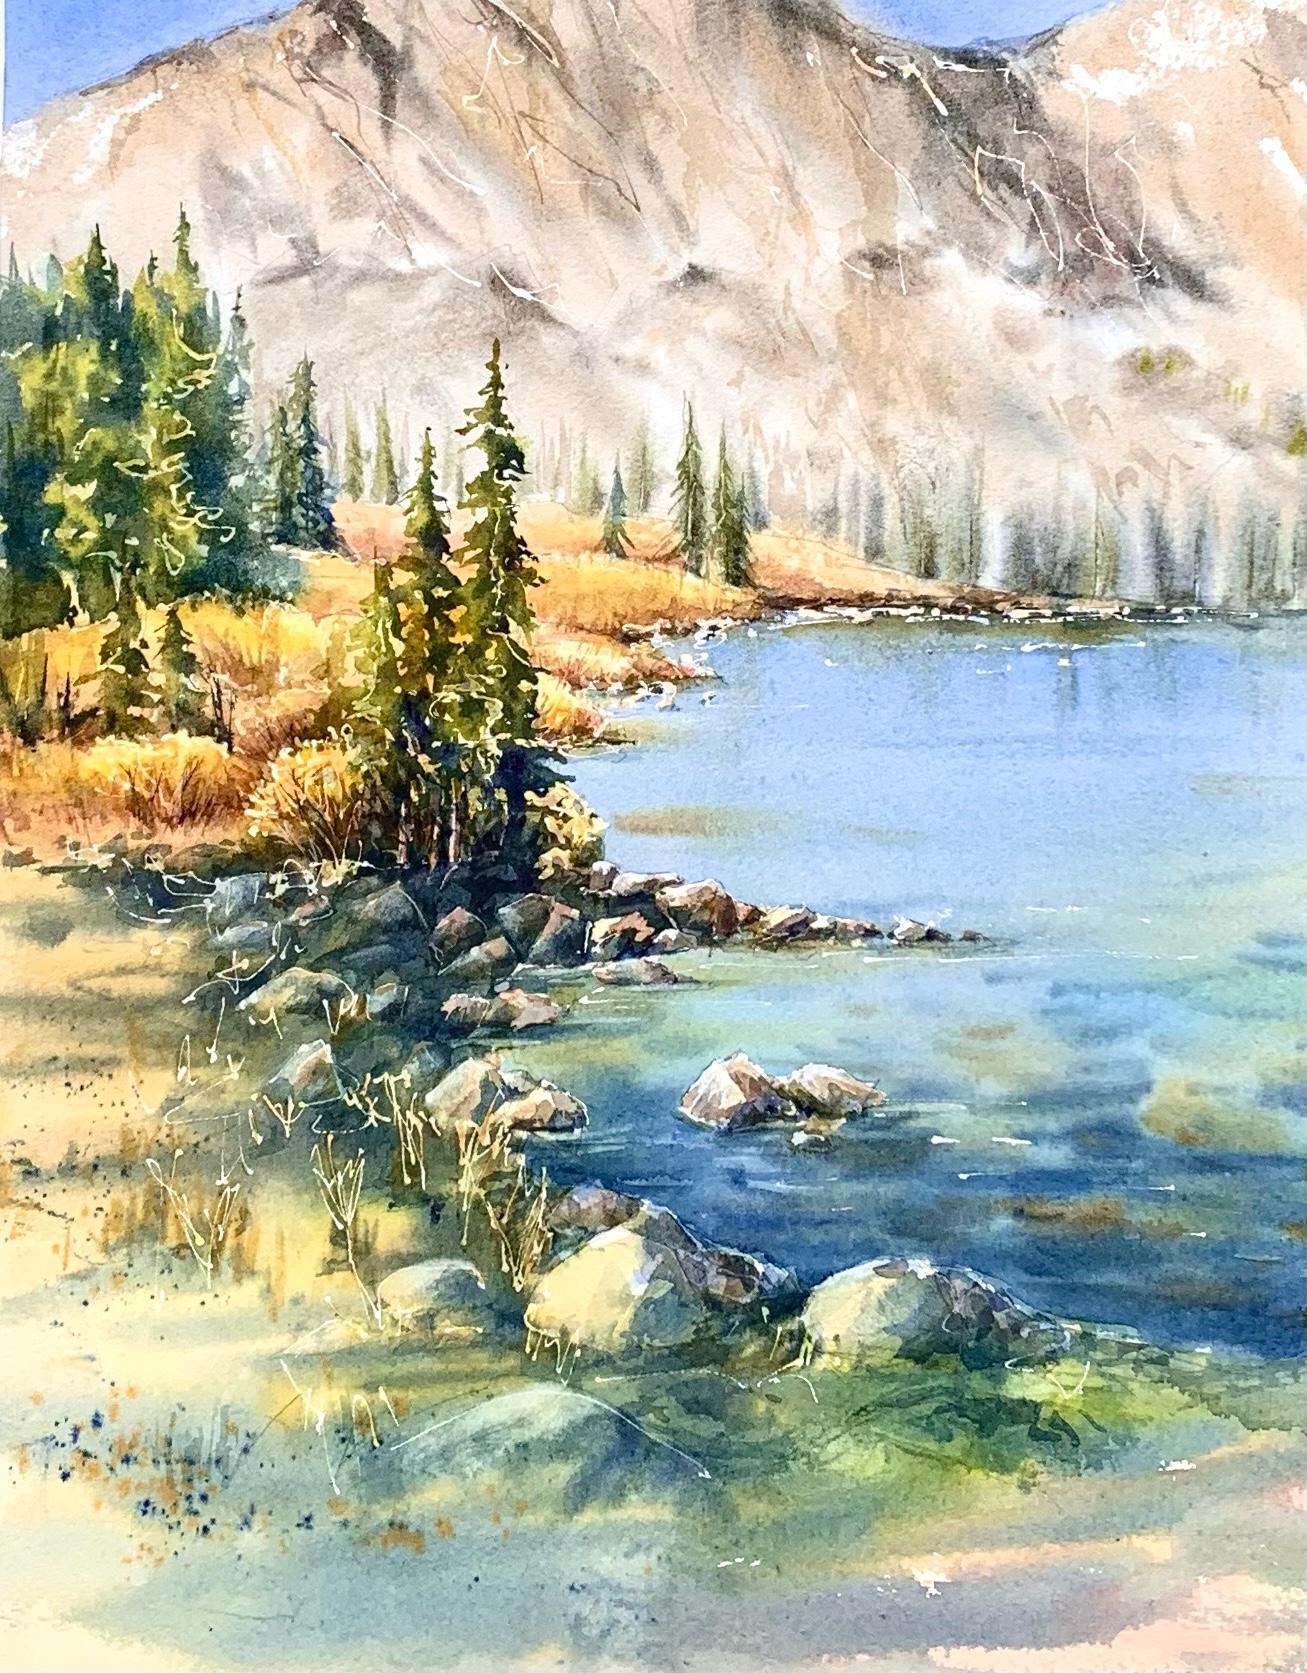 " Mountain Lake " Framed Limited Edition Watercolor Print Artist: Svetlana Howe Framed limited edition print from original watercolor painting  Lake Marie in the Snowy Range Mountains just West of Laramie Wyoming  11" long x 14" high limited edition print from original watercolor  16" long x 20" high matted  Matted with 3" wide white matting   18" long x 22" high in black wooden frame  D-Ring and wire for hanging